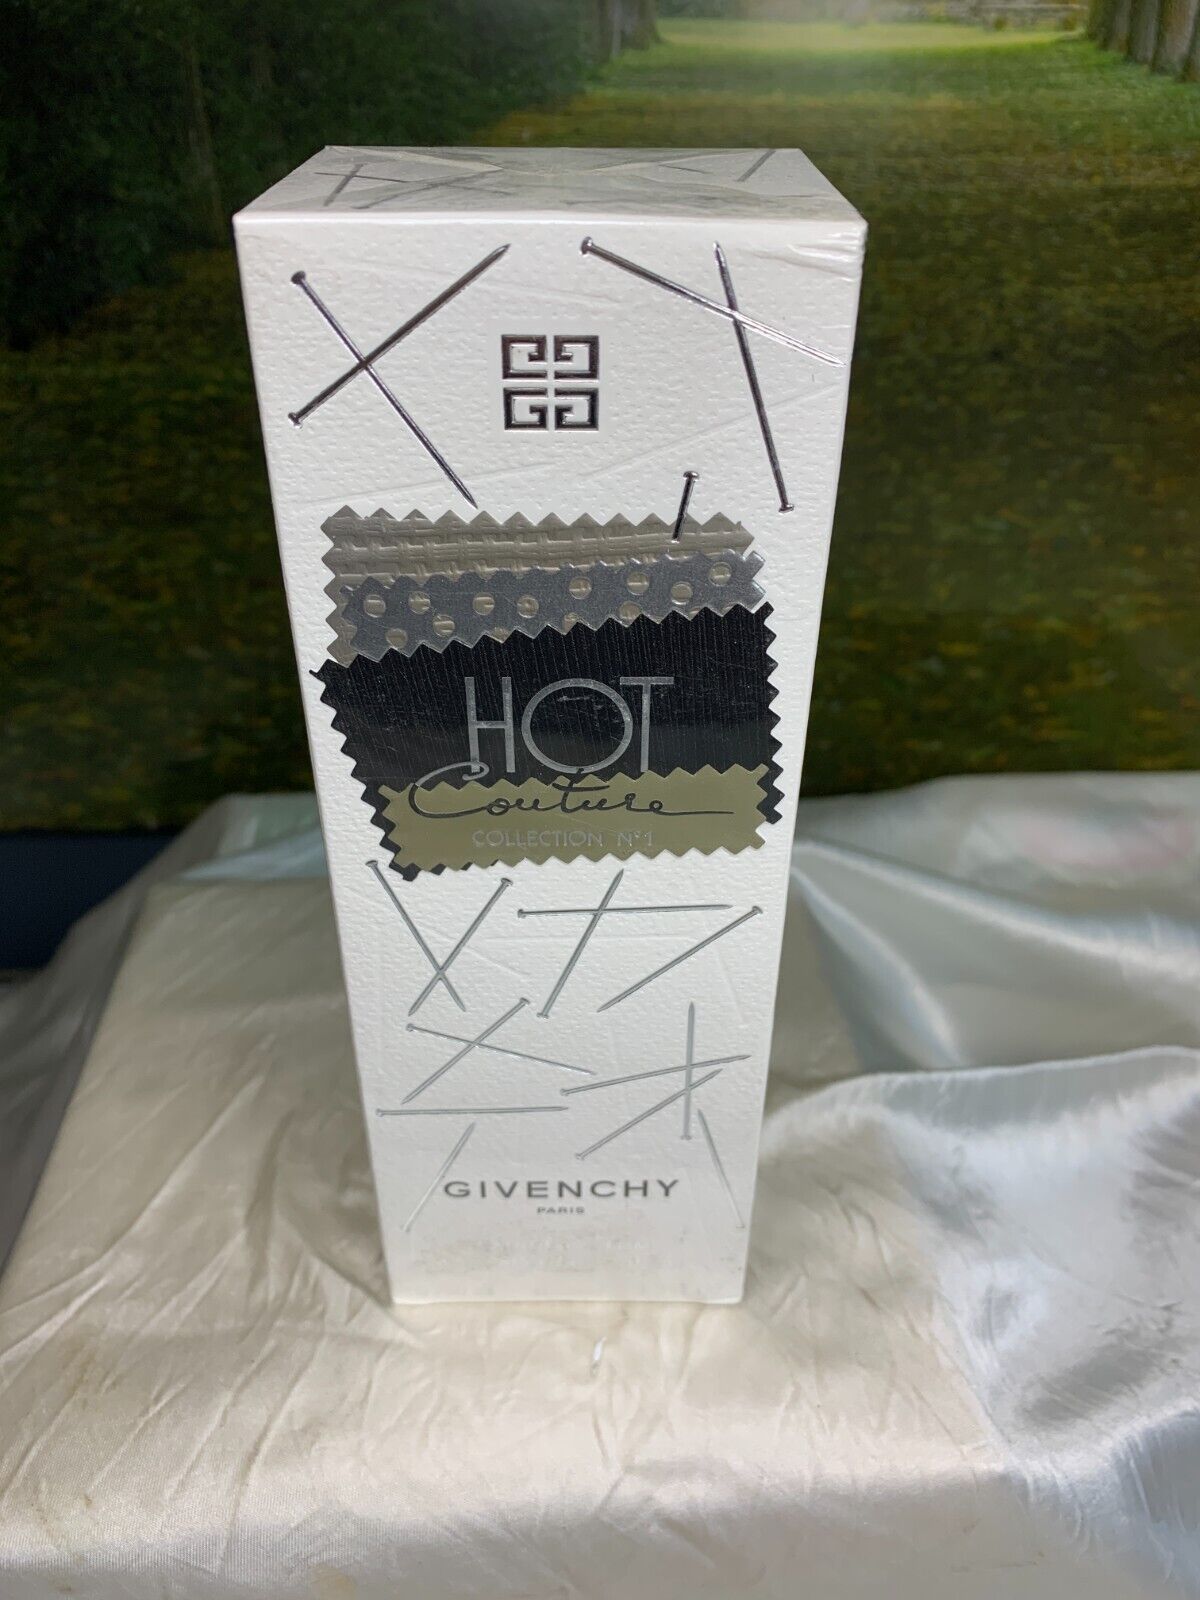 GIVENCHY HOT COUTURE EDP SEALED 100ML SPRAY